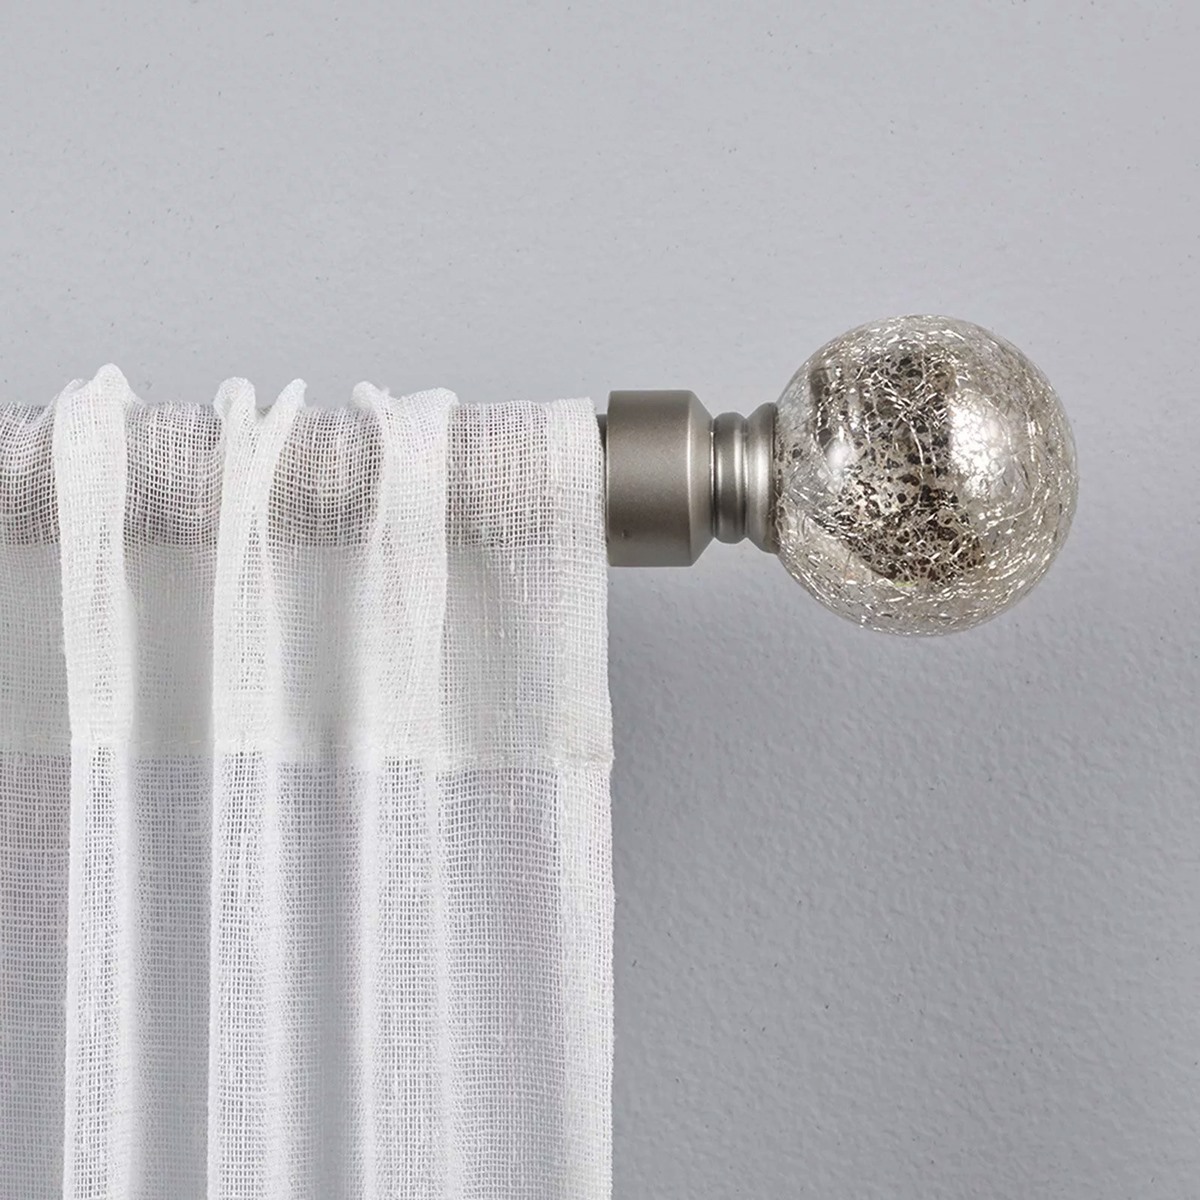 What Is A Finials For Curtain Rods